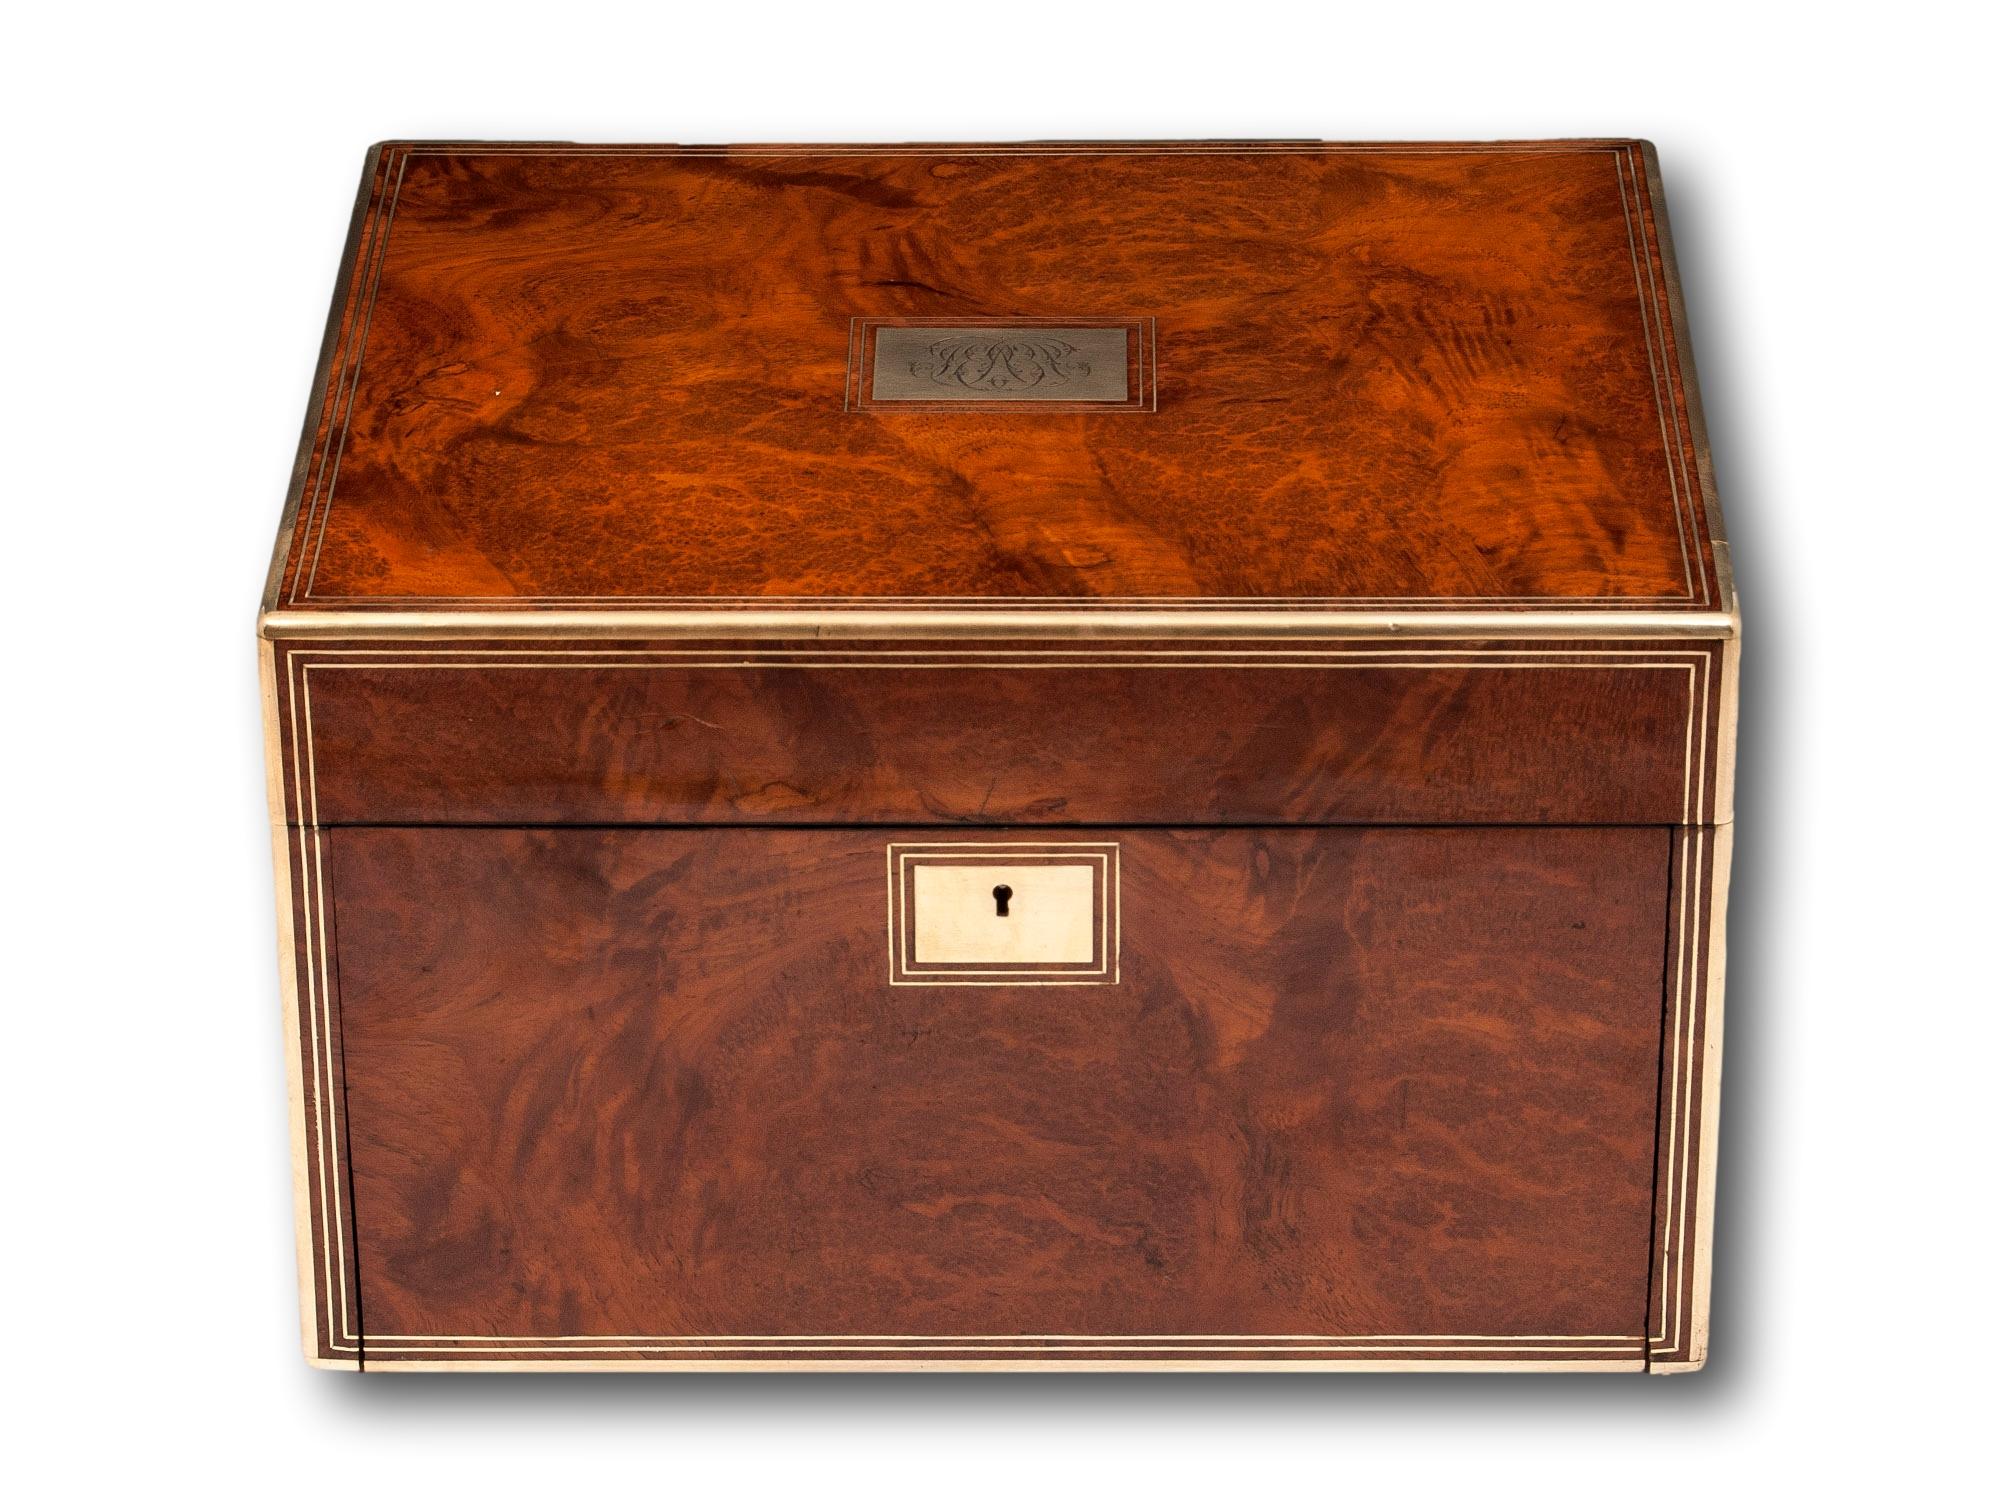 Antique Silver Gilt Vanity Box veneered in stunning Amboyna.

From our Vanity boxes, we are delighted to offer this stunning Amboyna veneered vanity box. The box with quadrant brass edging and matching escutcheon surrounding the Amboyna veneered